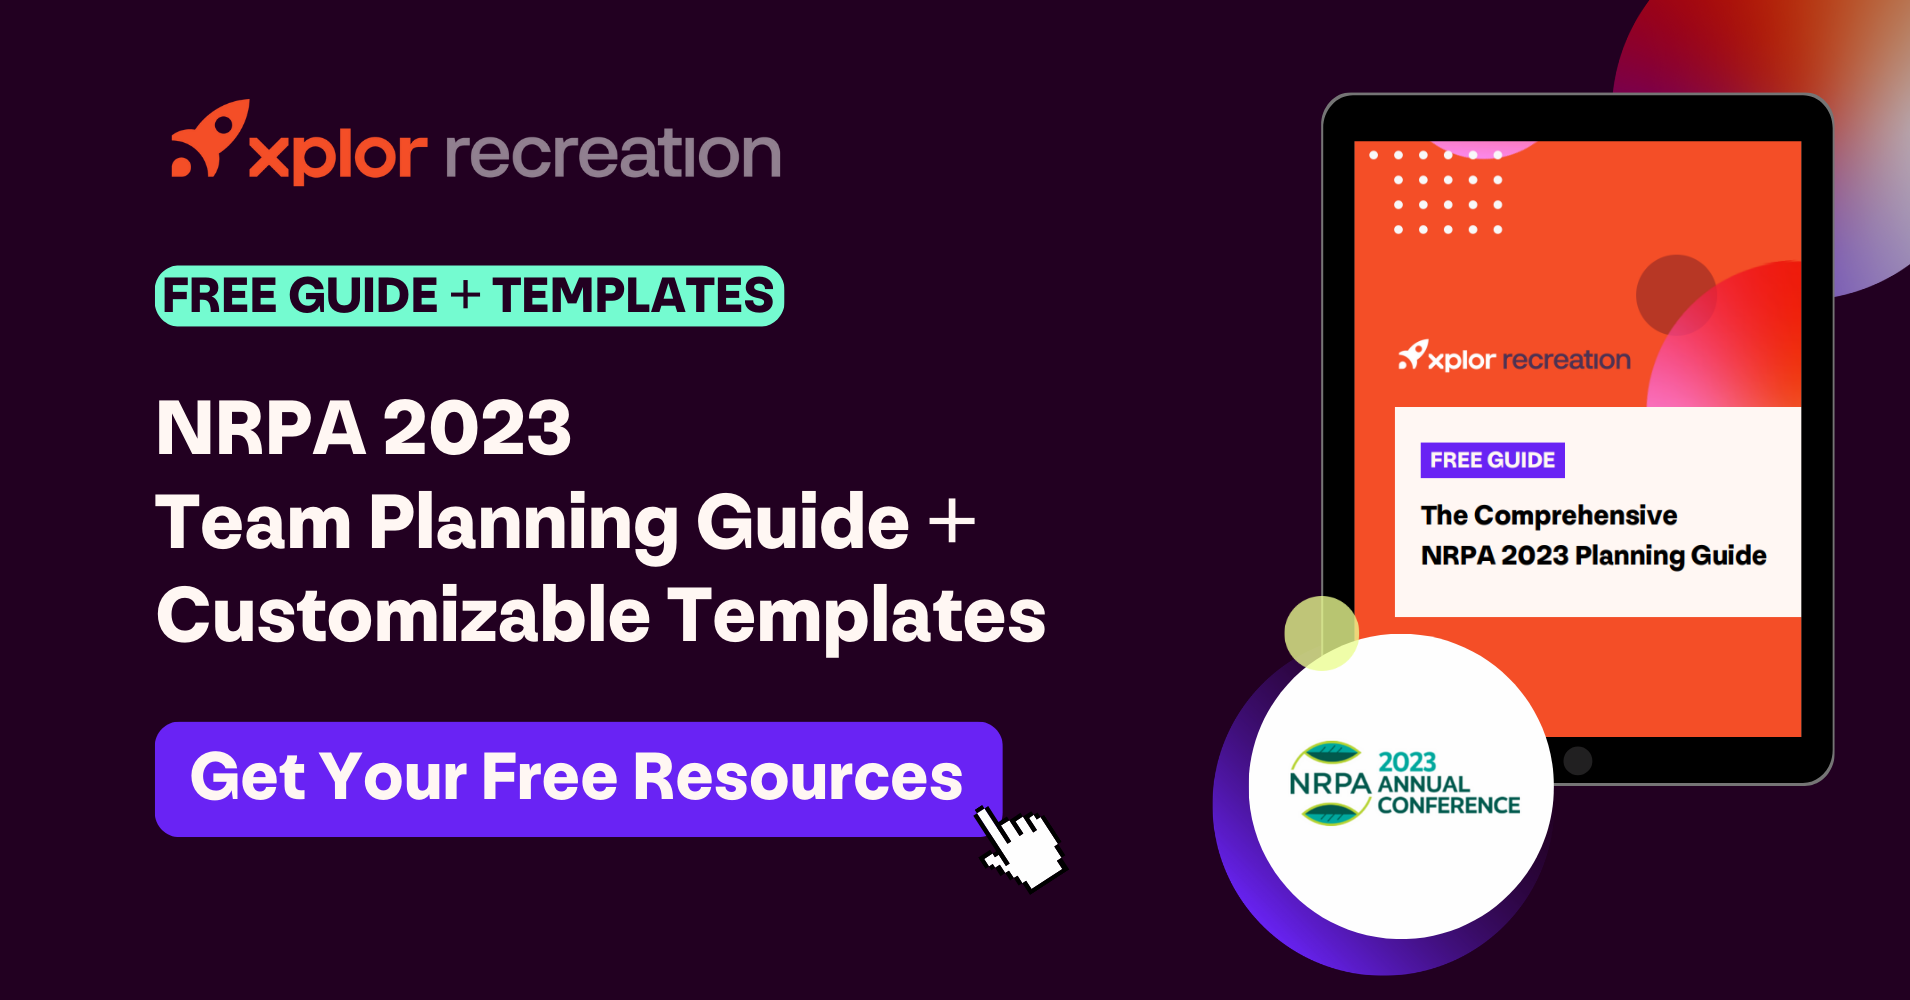 Xplor Recreations NRPA team planning guide template social sharing graphic